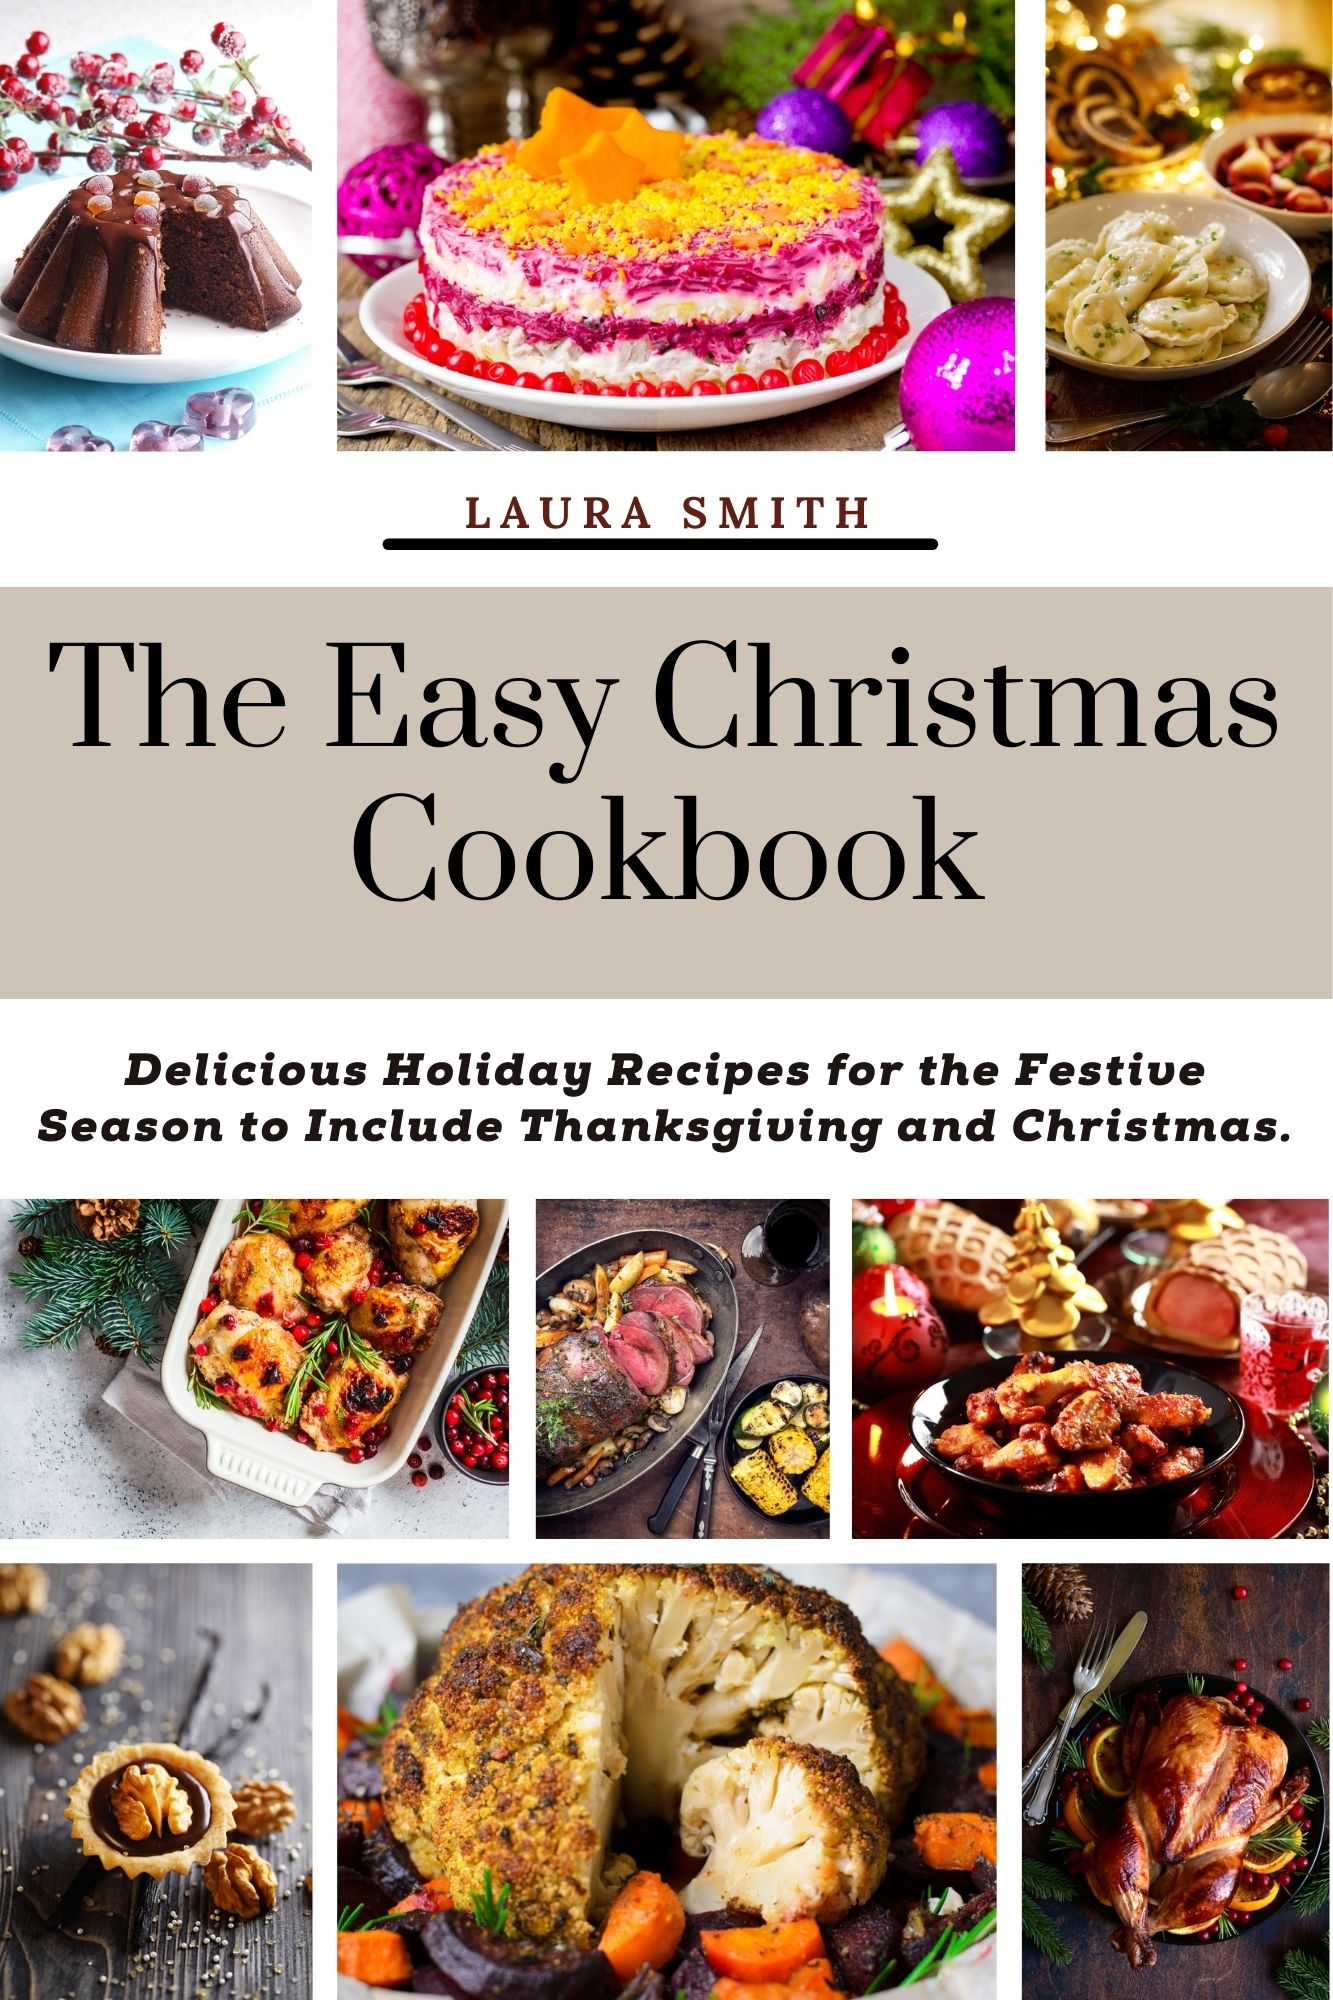 FREE: The Easy Christmas cookbook by Laura Smith